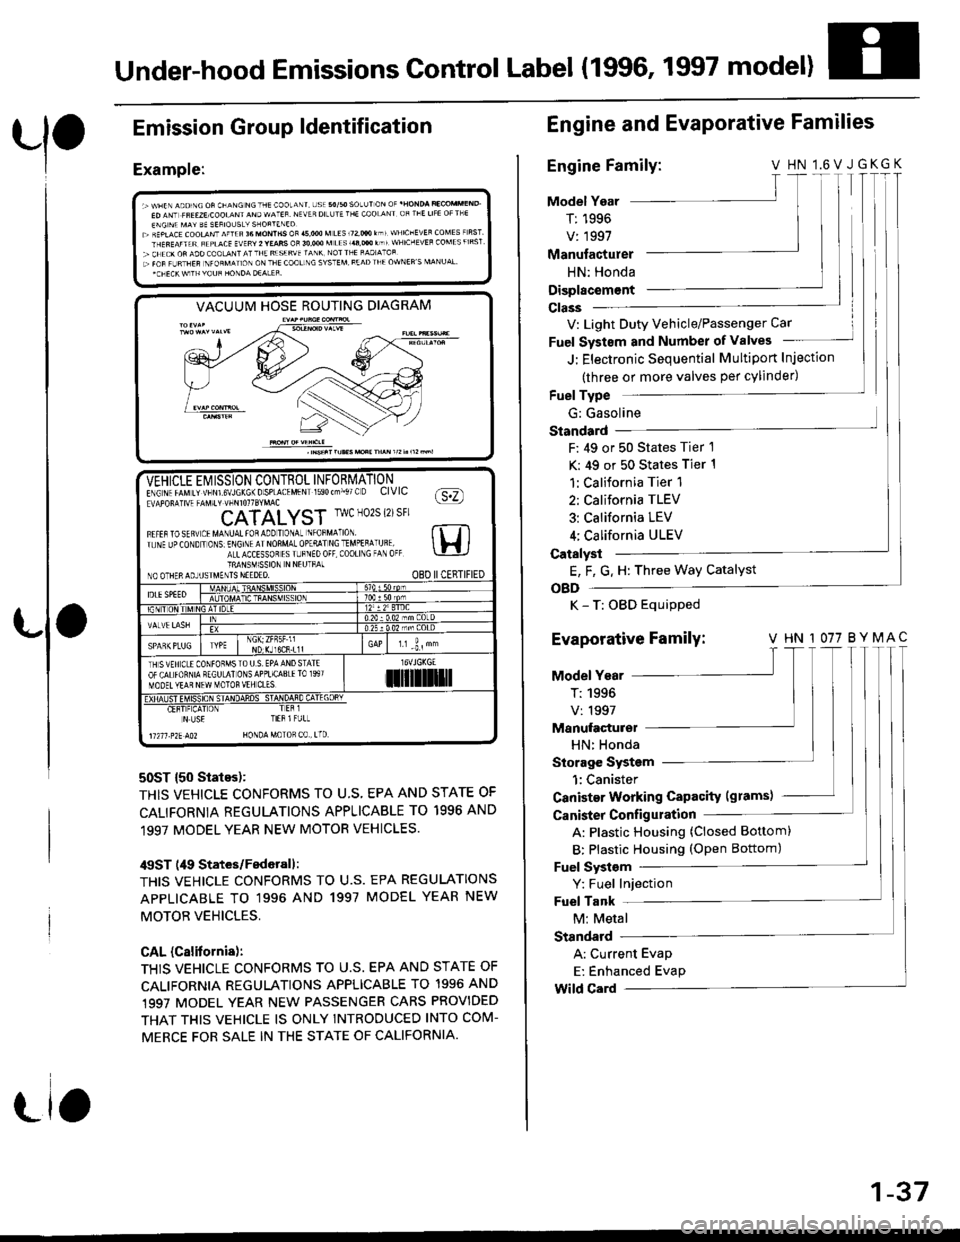 HONDA CIVIC 1996 6.G Workshop Manual Under-hood Emissions Control Label (1996, 1997 model)
Emission
Example:
Group ldentification
VACUUM HOSE ROUTING DIAGRAM
50ST {50 States):
THIS VEHICLE CONFORMS TO U.S, EPA AND STATE OF
CALIFORNIA REG